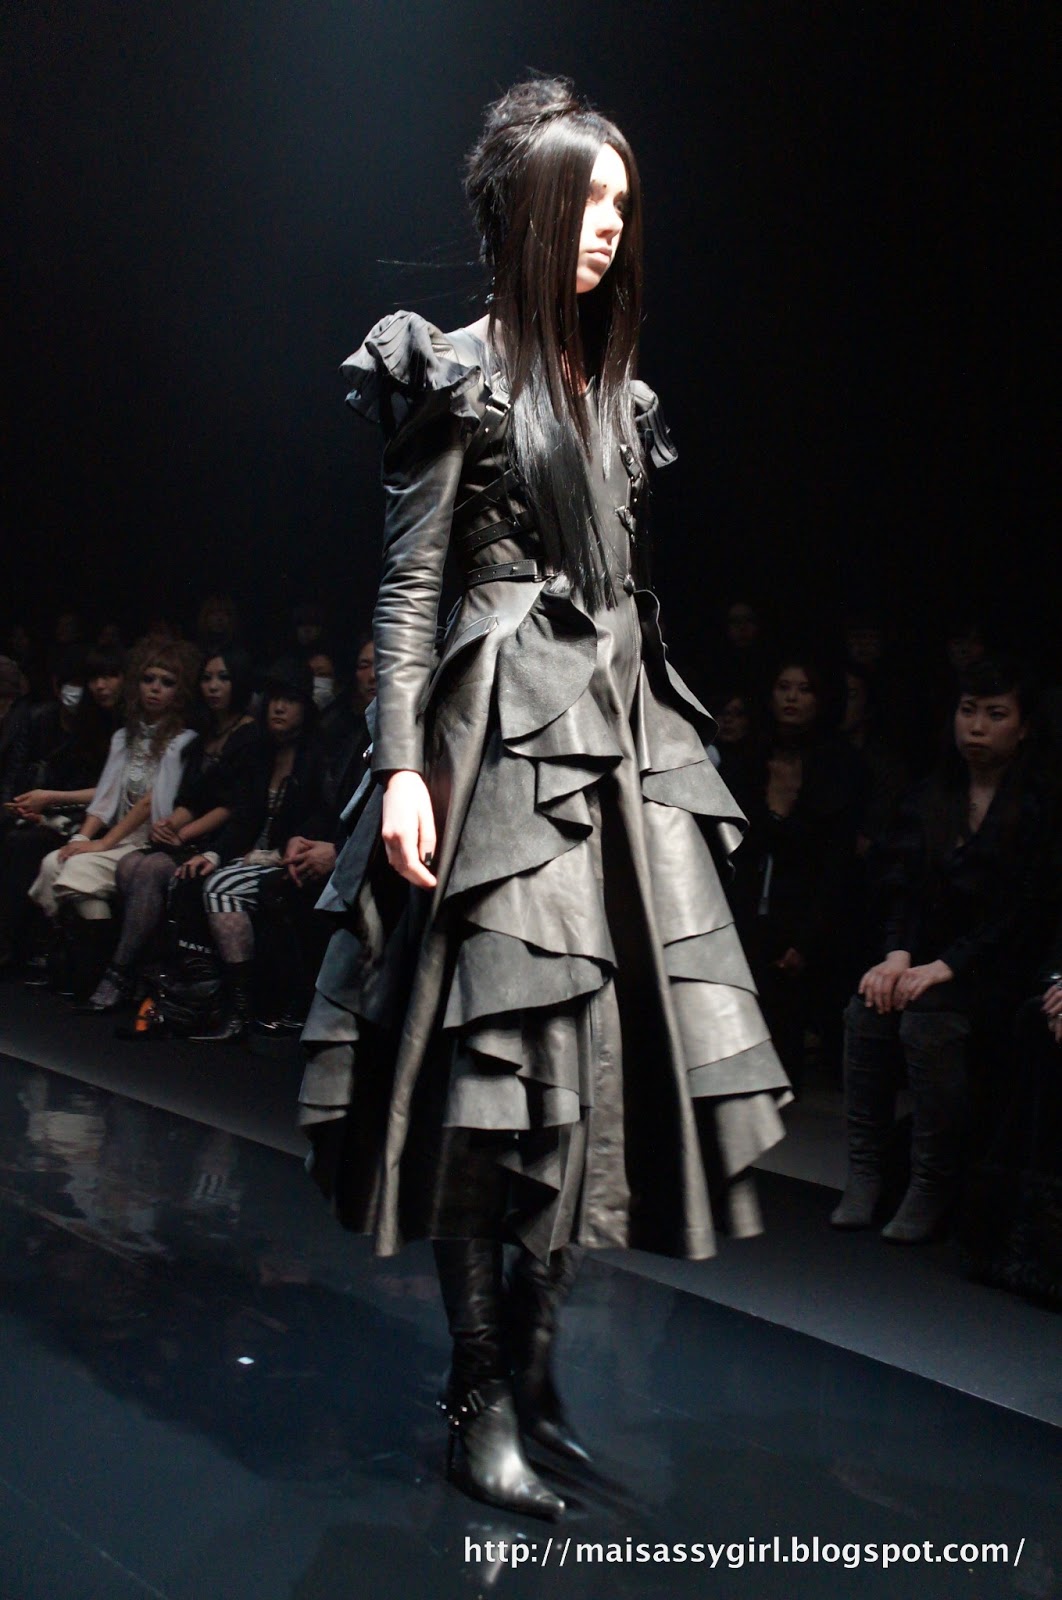 maisassygirl: ALICE AUAA A/W 2013-14 COLLECTION REPORT @ SHIBUYA